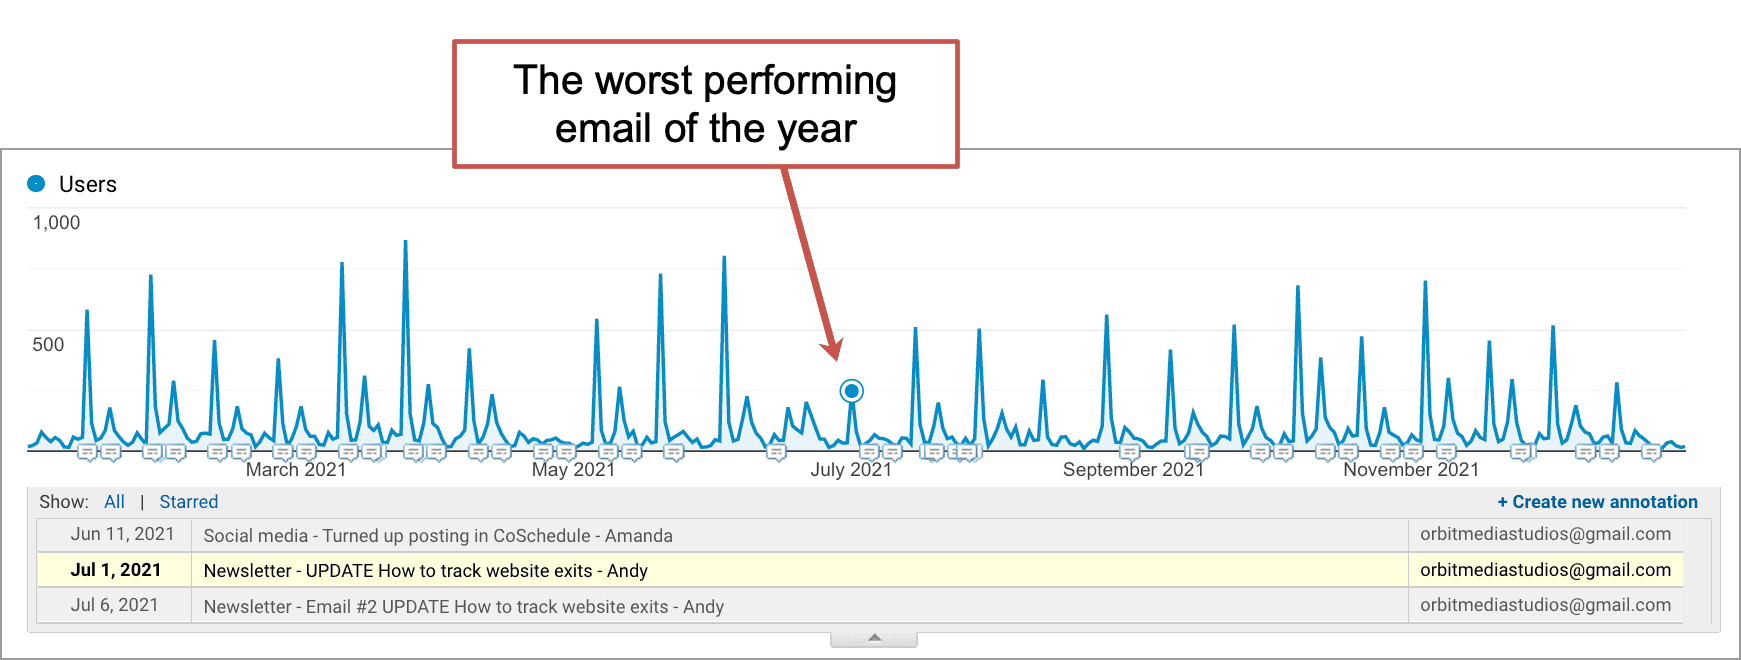 the worst performing email of the year